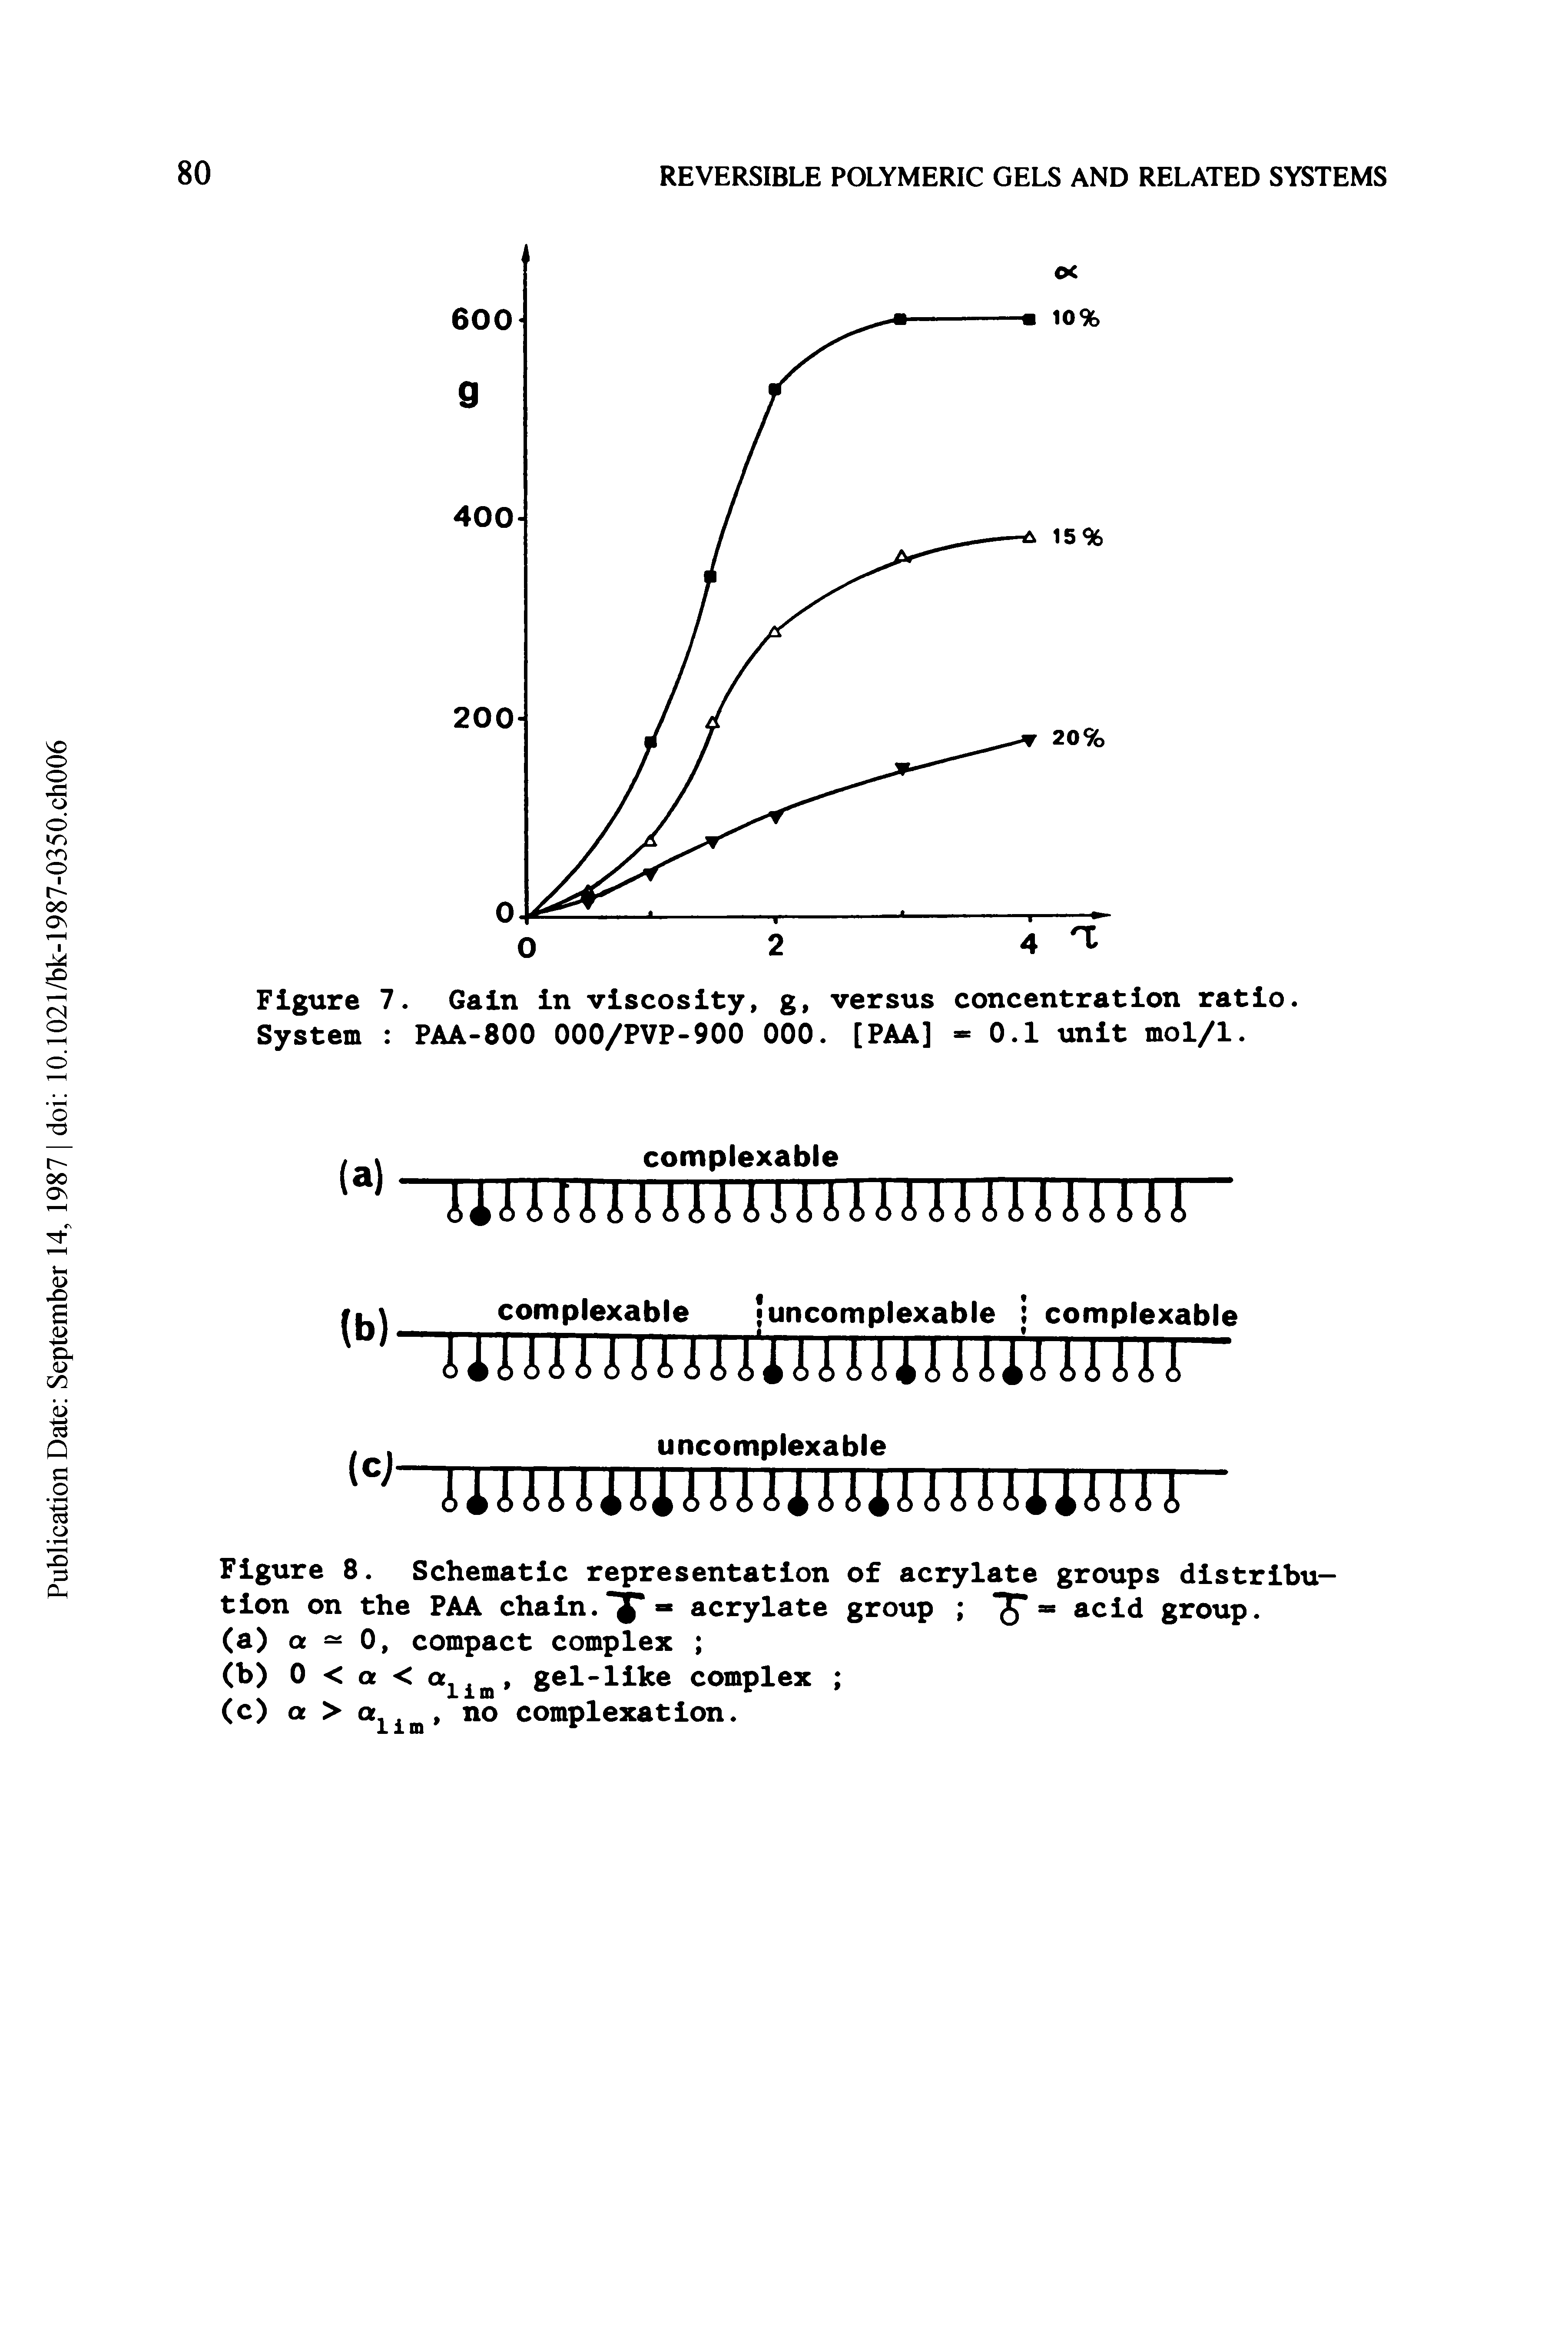 Figure 8. Schematic representation of acrylate groups distribution on the PAA chain. acrylate group "J" acid group.